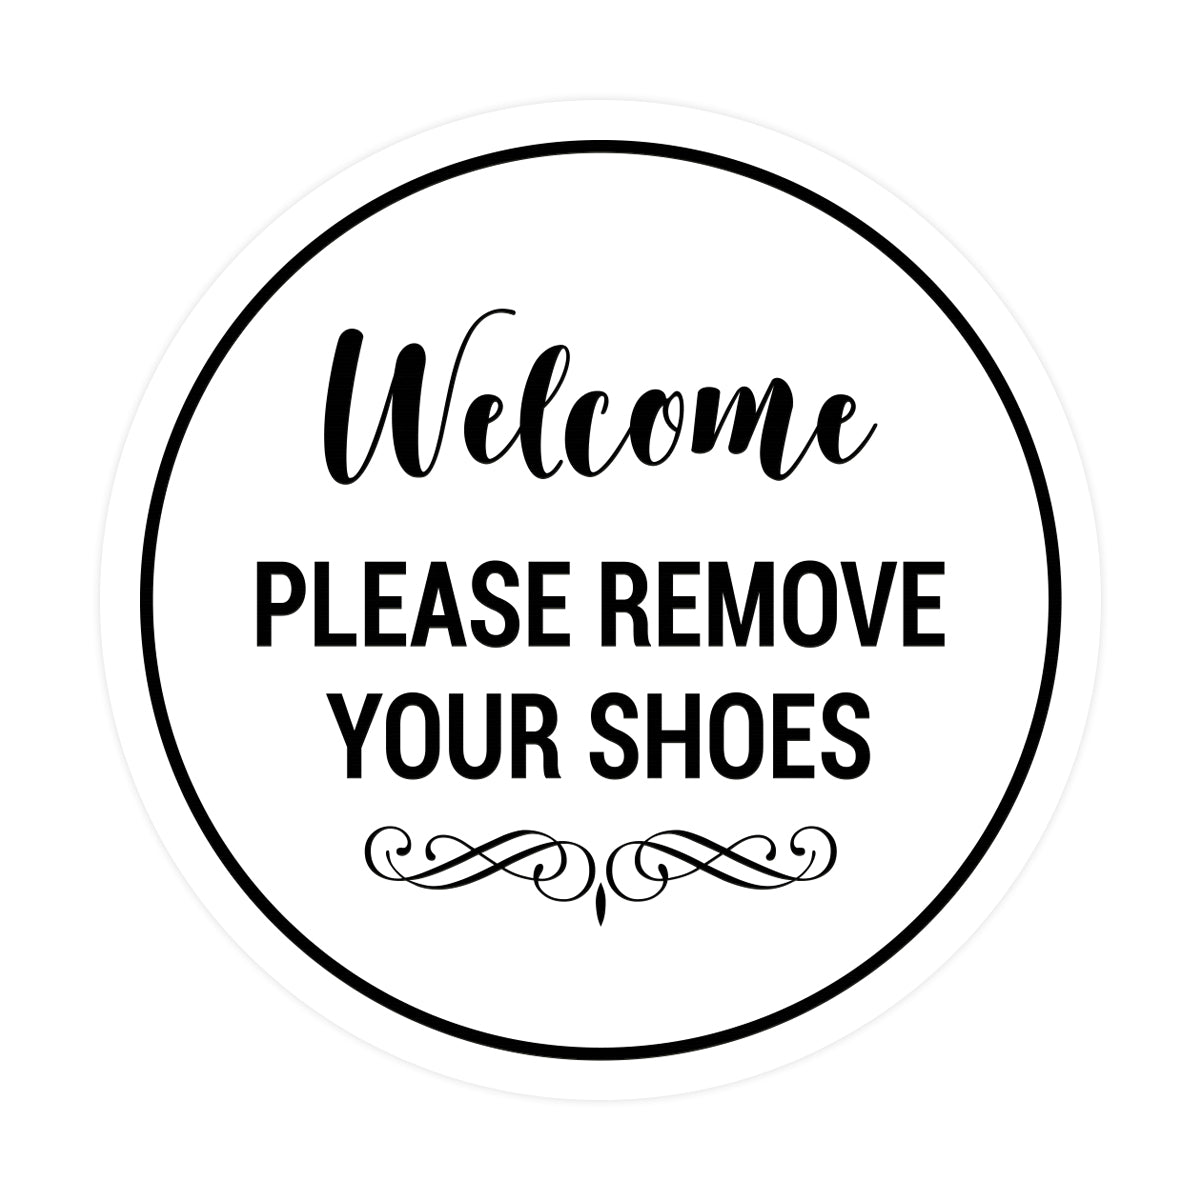 Please Remove your Shoes Sign | Best Prohibition Signs at Lowest Price